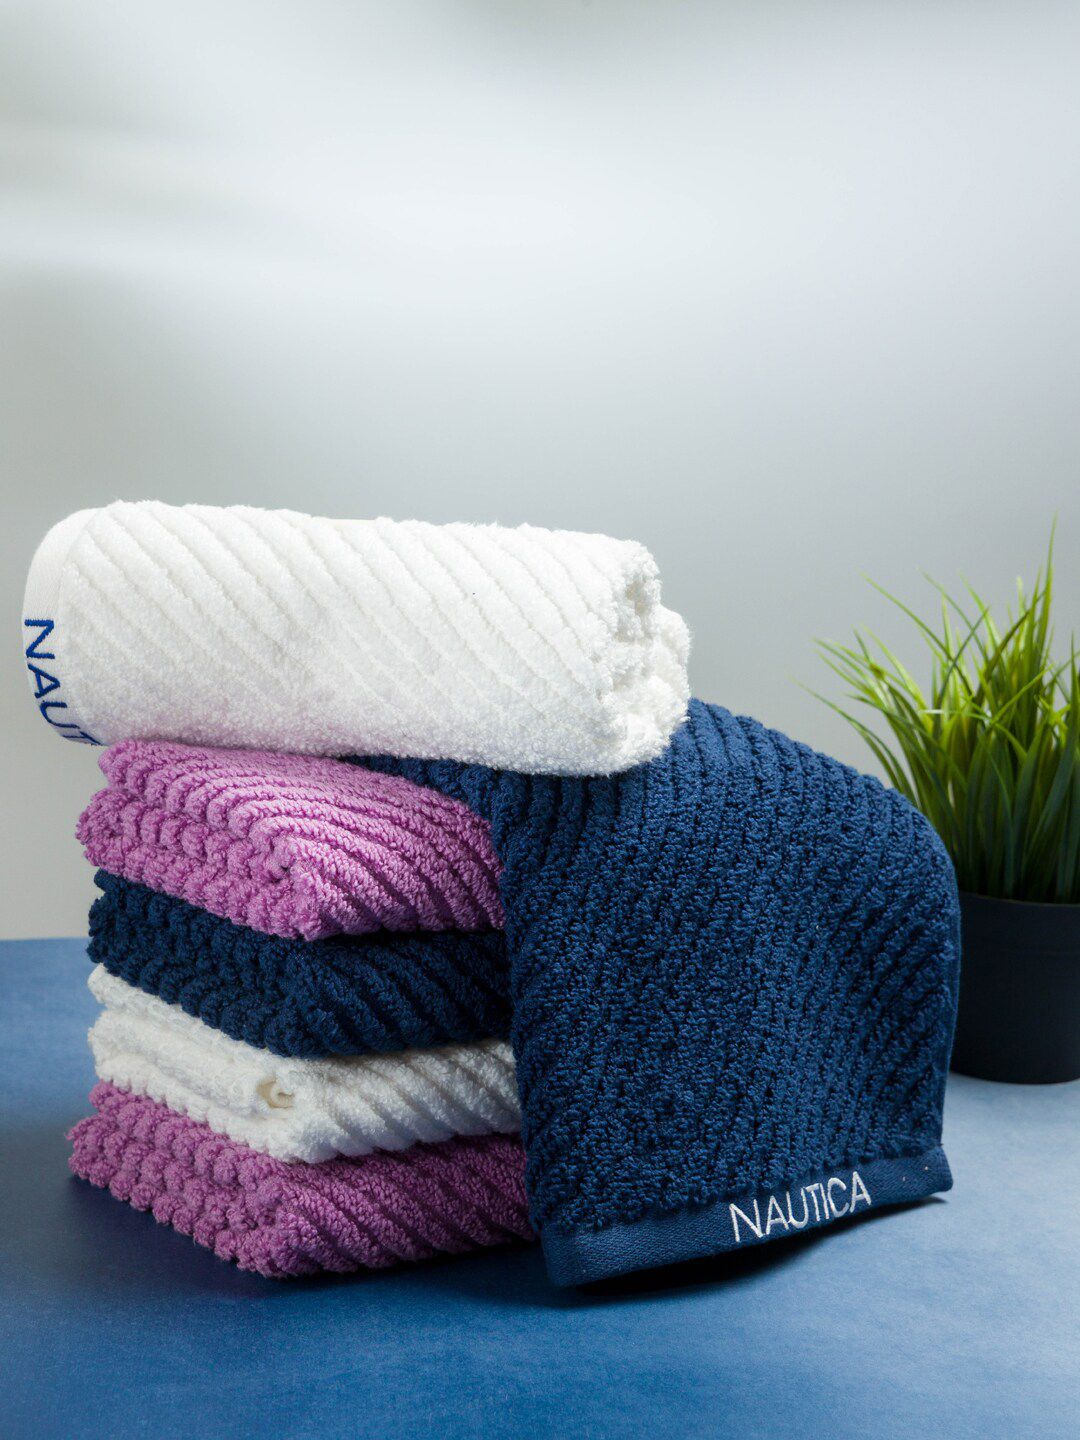 Nautica Set Of 6 Navy Blue & White Striped Pure Cotton 600 GSM Hand Towels Price in India